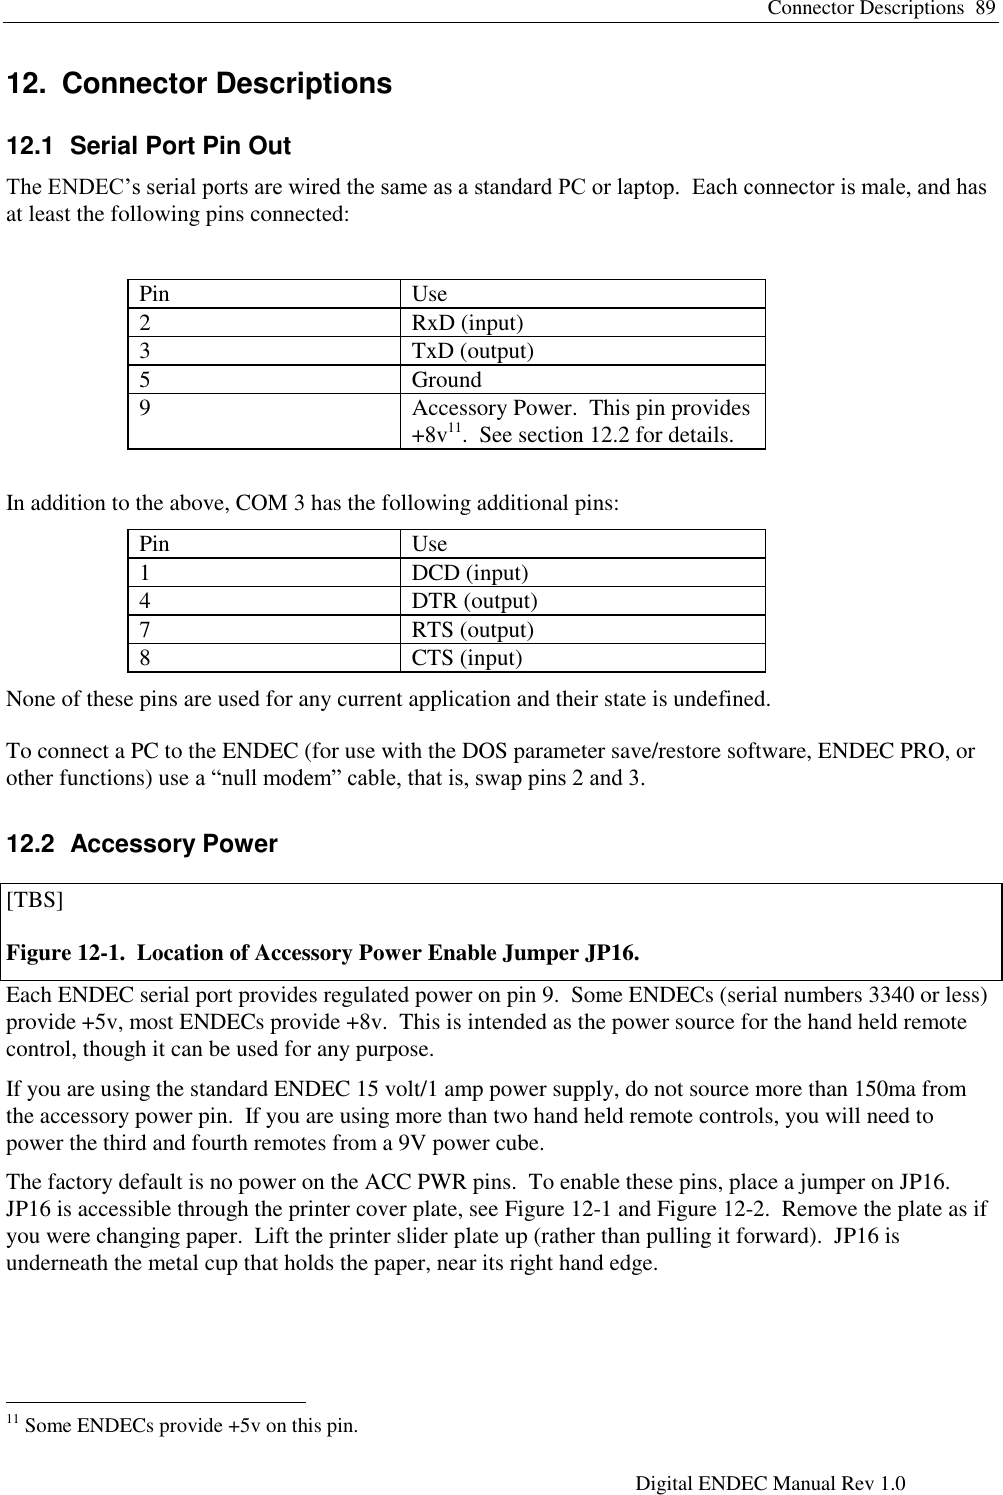 Connector Descriptions  89     Digital ENDEC Manual Rev 1.0 12.  Connector Descriptions 12.1  Serial Port Pin Out The ENDEC‟s serial ports are wired the same as a standard PC or laptop.  Each connector is male, and has at least the following pins connected:  Pin Use 2 RxD (input) 3 TxD (output) 5 Ground 9 Accessory Power.  This pin provides +8v11.  See section 12.2 for details.   In addition to the above, COM 3 has the following additional pins: Pin Use 1 DCD (input) 4 DTR (output) 7 RTS (output) 8 CTS (input) None of these pins are used for any current application and their state is undefined. To connect a PC to the ENDEC (for use with the DOS parameter save/restore software, ENDEC PRO, or other functions) use a “null modem” cable, that is, swap pins 2 and 3. 12.2  Accessory Power Each ENDEC serial port provides regulated power on pin 9.  Some ENDECs (serial numbers 3340 or less) provide +5v, most ENDECs provide +8v.  This is intended as the power source for the hand held remote control, though it can be used for any purpose. If you are using the standard ENDEC 15 volt/1 amp power supply, do not source more than 150ma from the accessory power pin.  If you are using more than two hand held remote controls, you will need to power the third and fourth remotes from a 9V power cube. The factory default is no power on the ACC PWR pins.  To enable these pins, place a jumper on JP16.  JP16 is accessible through the printer cover plate, see Figure 12-1 and Figure 12-2.  Remove the plate as if you were changing paper.  Lift the printer slider plate up (rather than pulling it forward).  JP16 is underneath the metal cup that holds the paper, near its right hand edge.                                                        11 Some ENDECs provide +5v on this pin. [TBS] Figure 12-1.  Location of Accessory Power Enable Jumper JP16. 